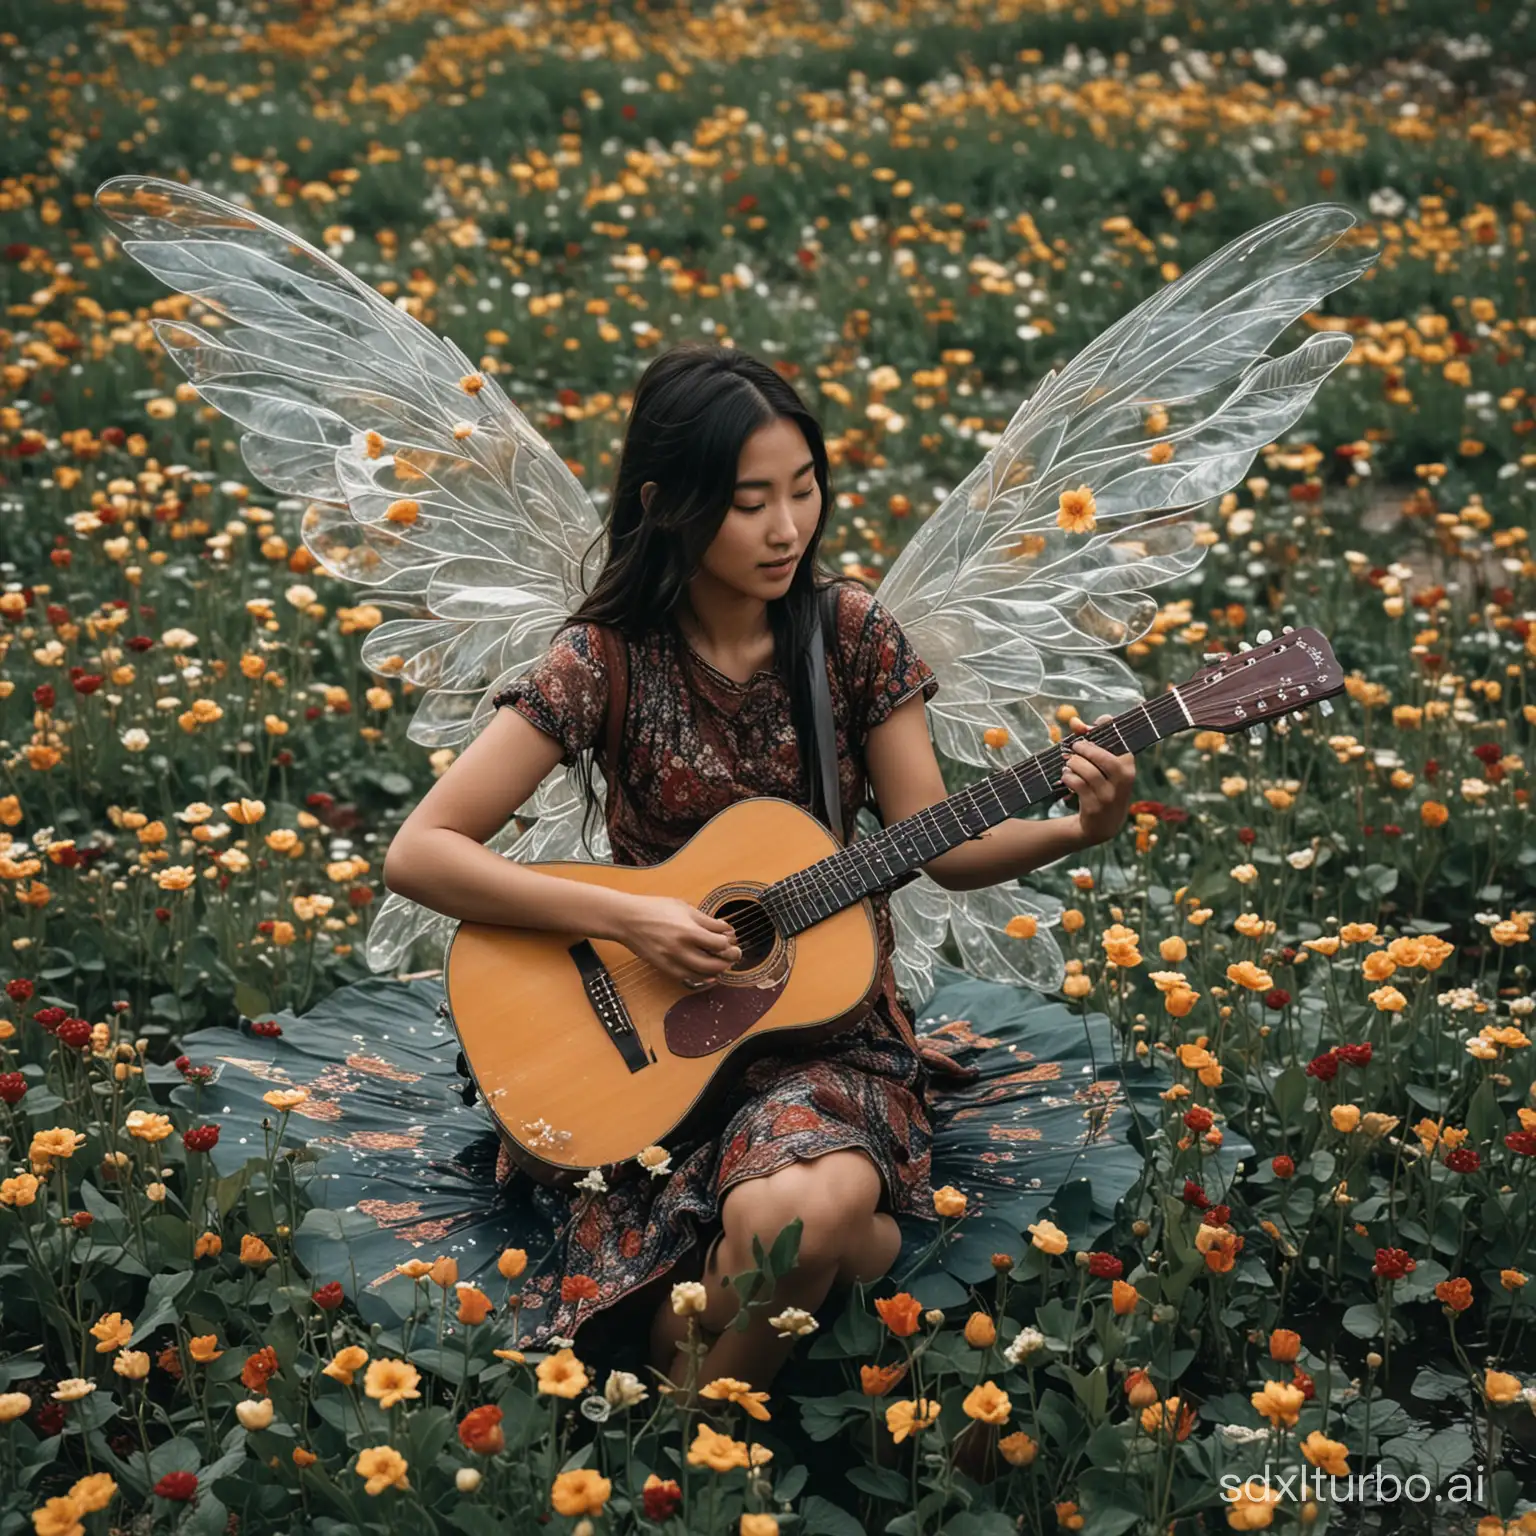 Girl-Playing-Guitar-Amid-Tibetan-Flowers-with-Transparent-Wings